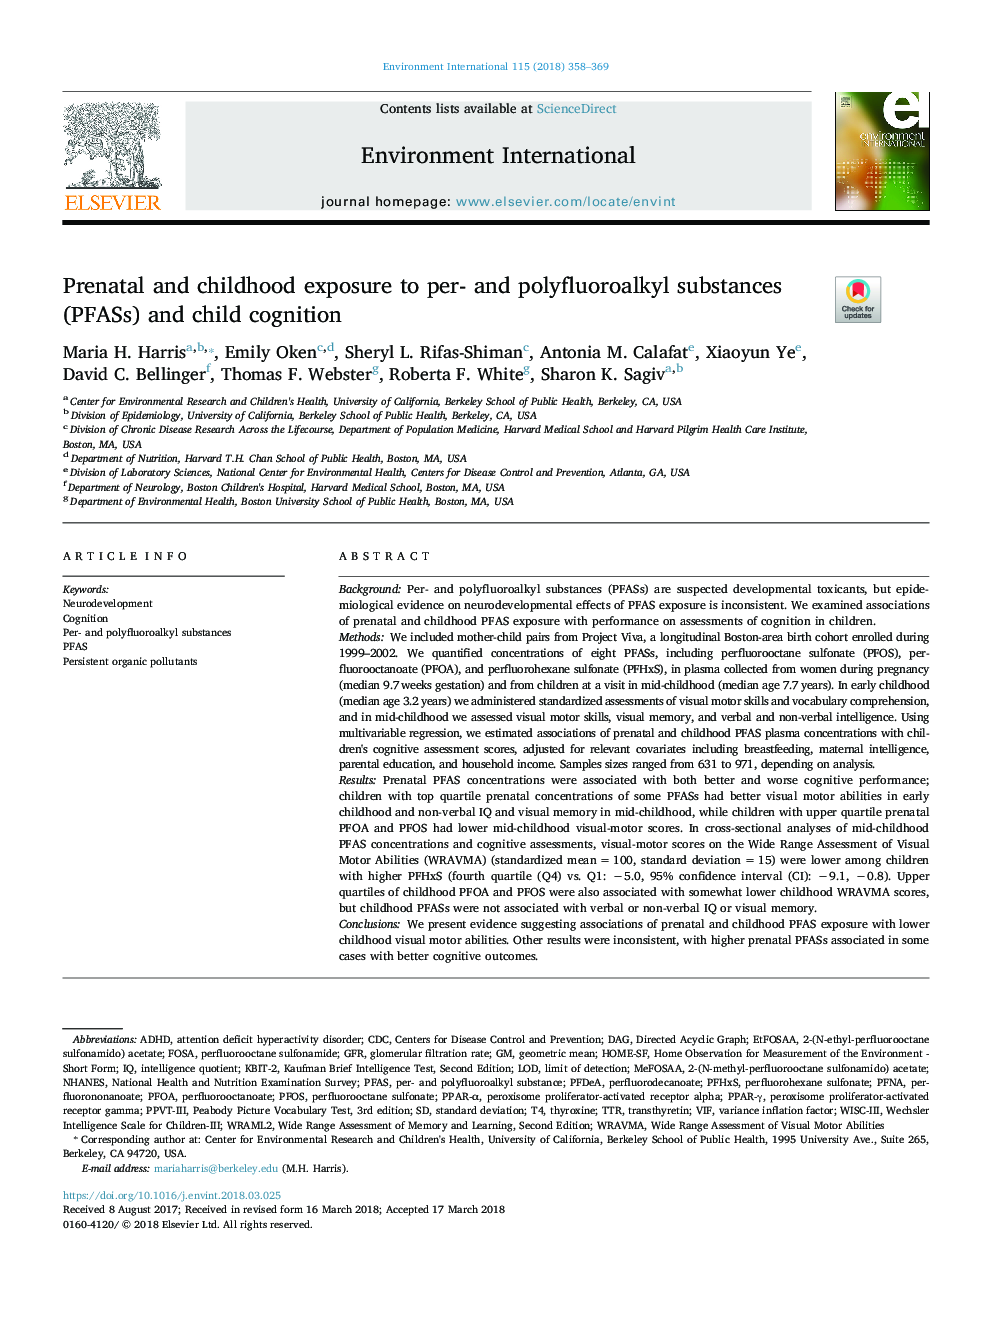 Prenatal and childhood exposure to per- and polyfluoroalkyl substances (PFASs) and child cognition